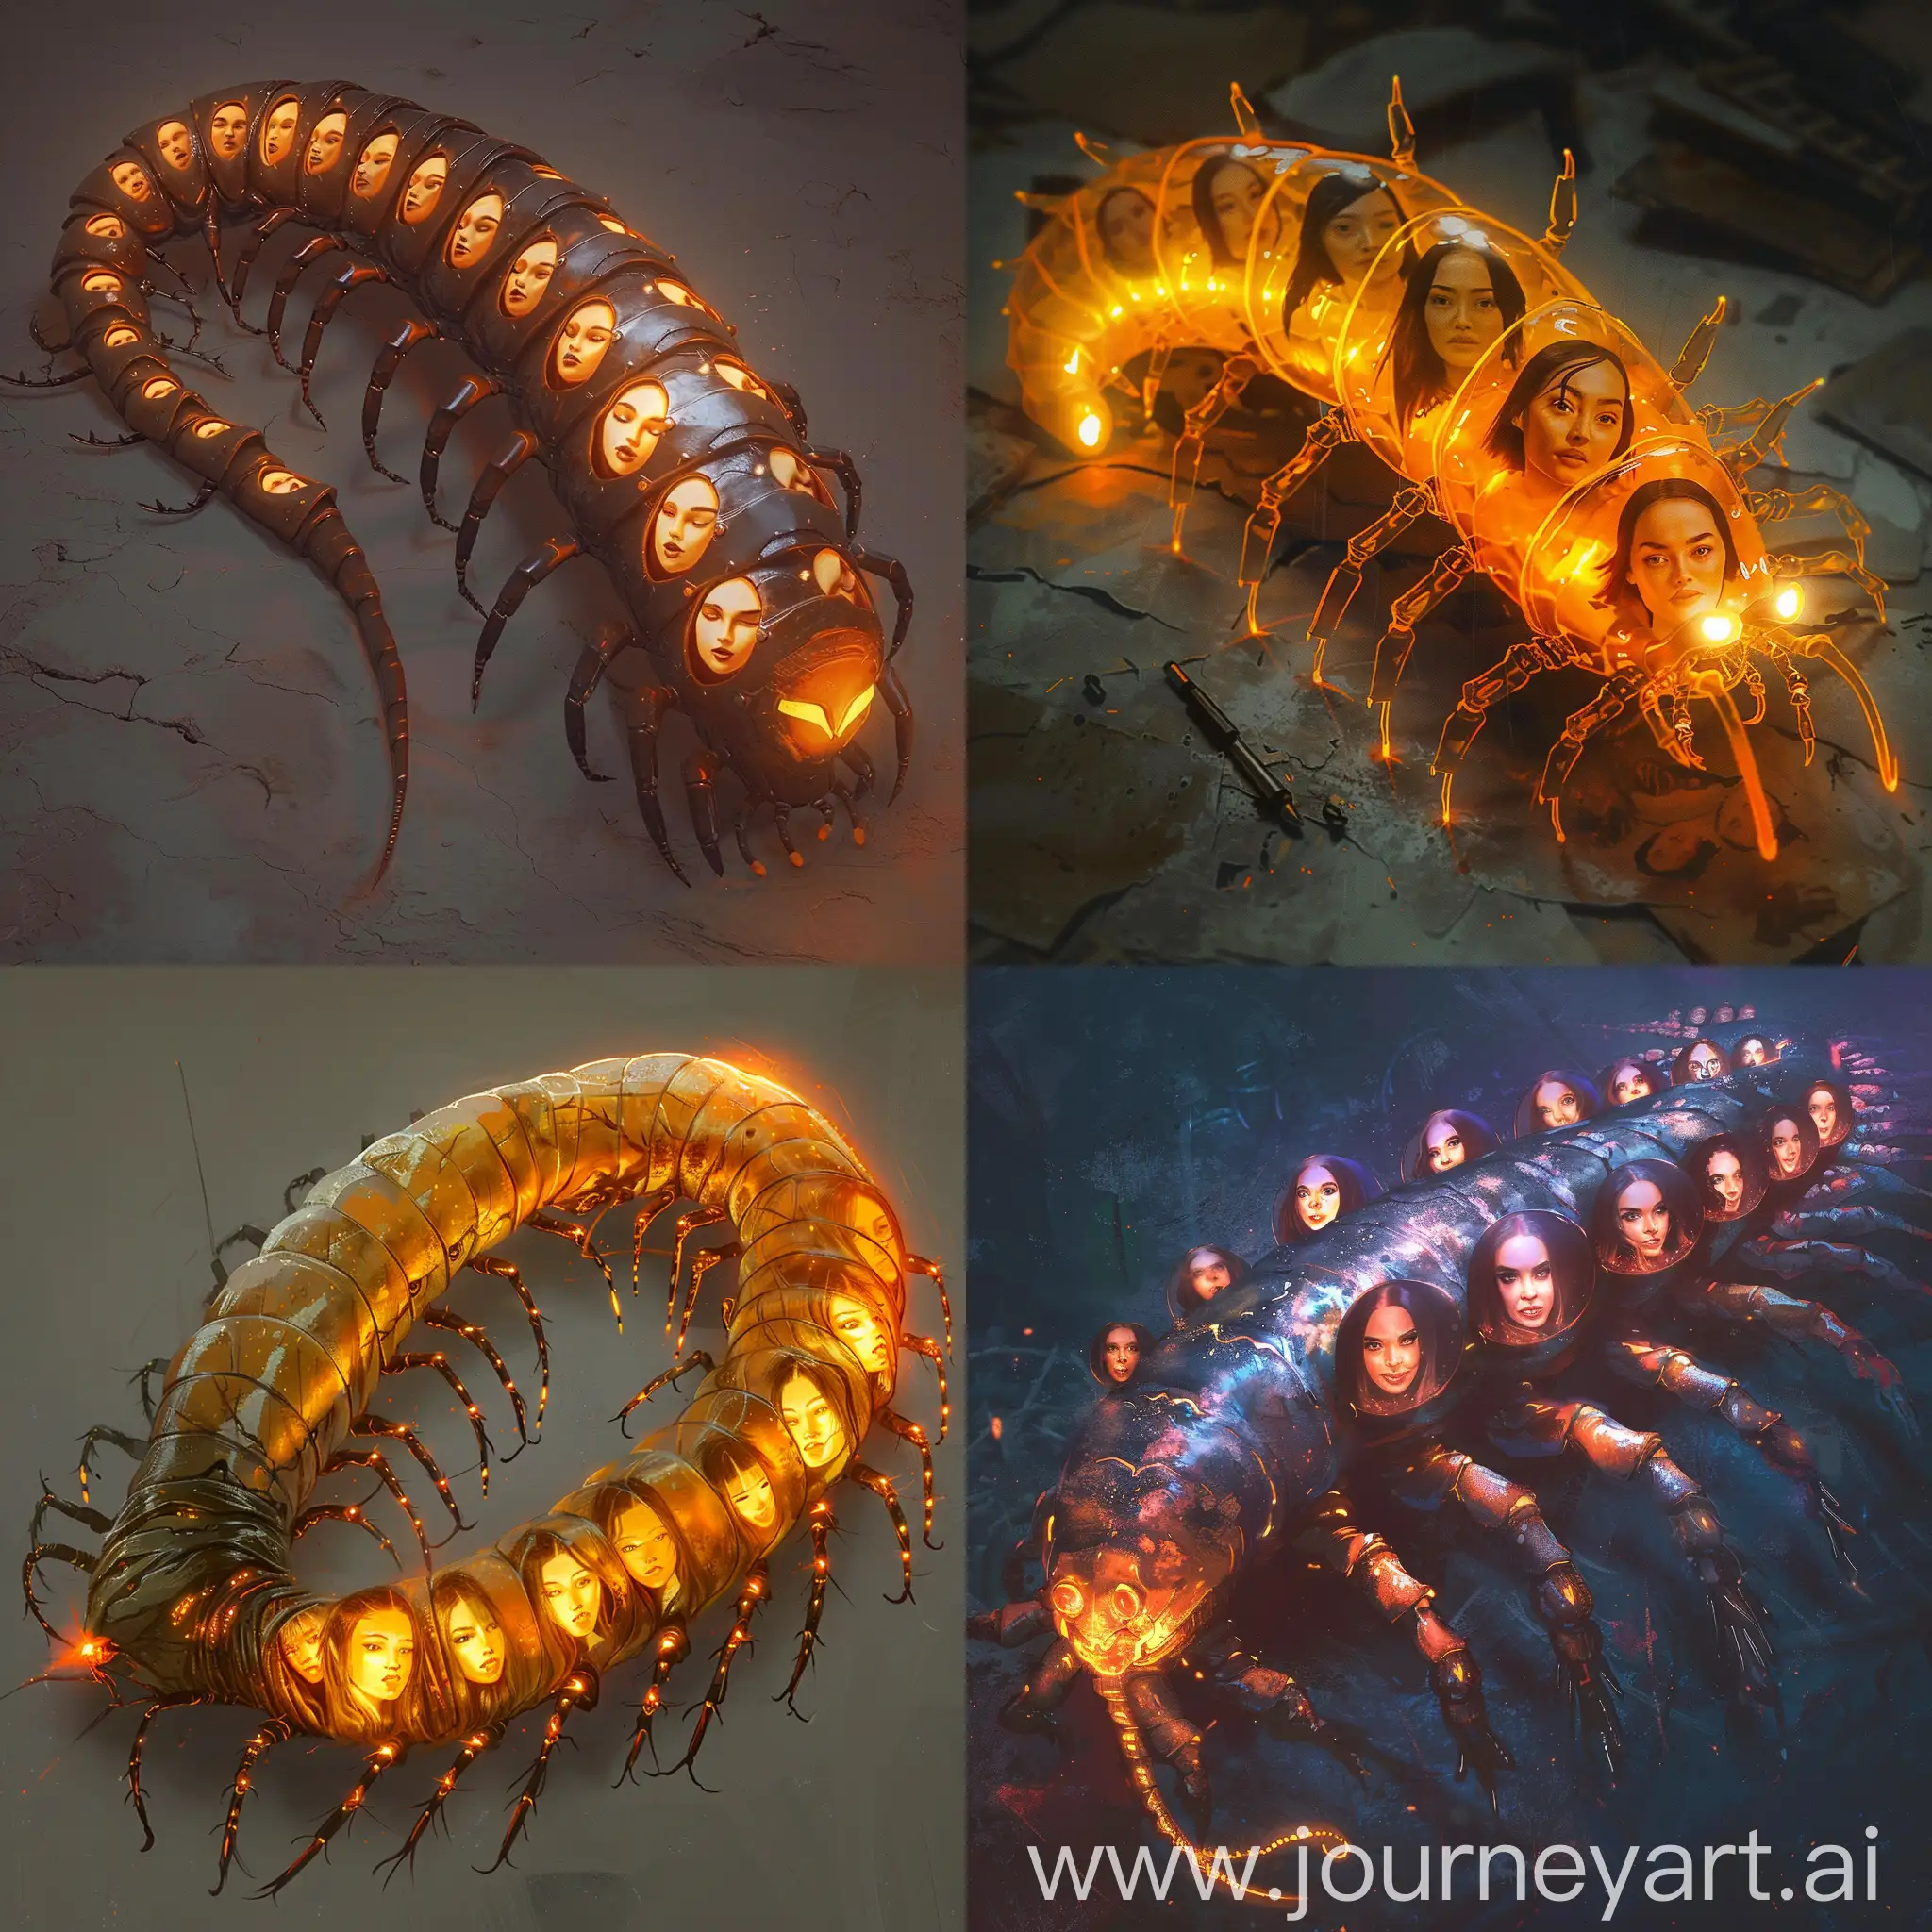 Ethereal-Giant-Glowing-Centipede-with-Enigmatic-Female-Faces